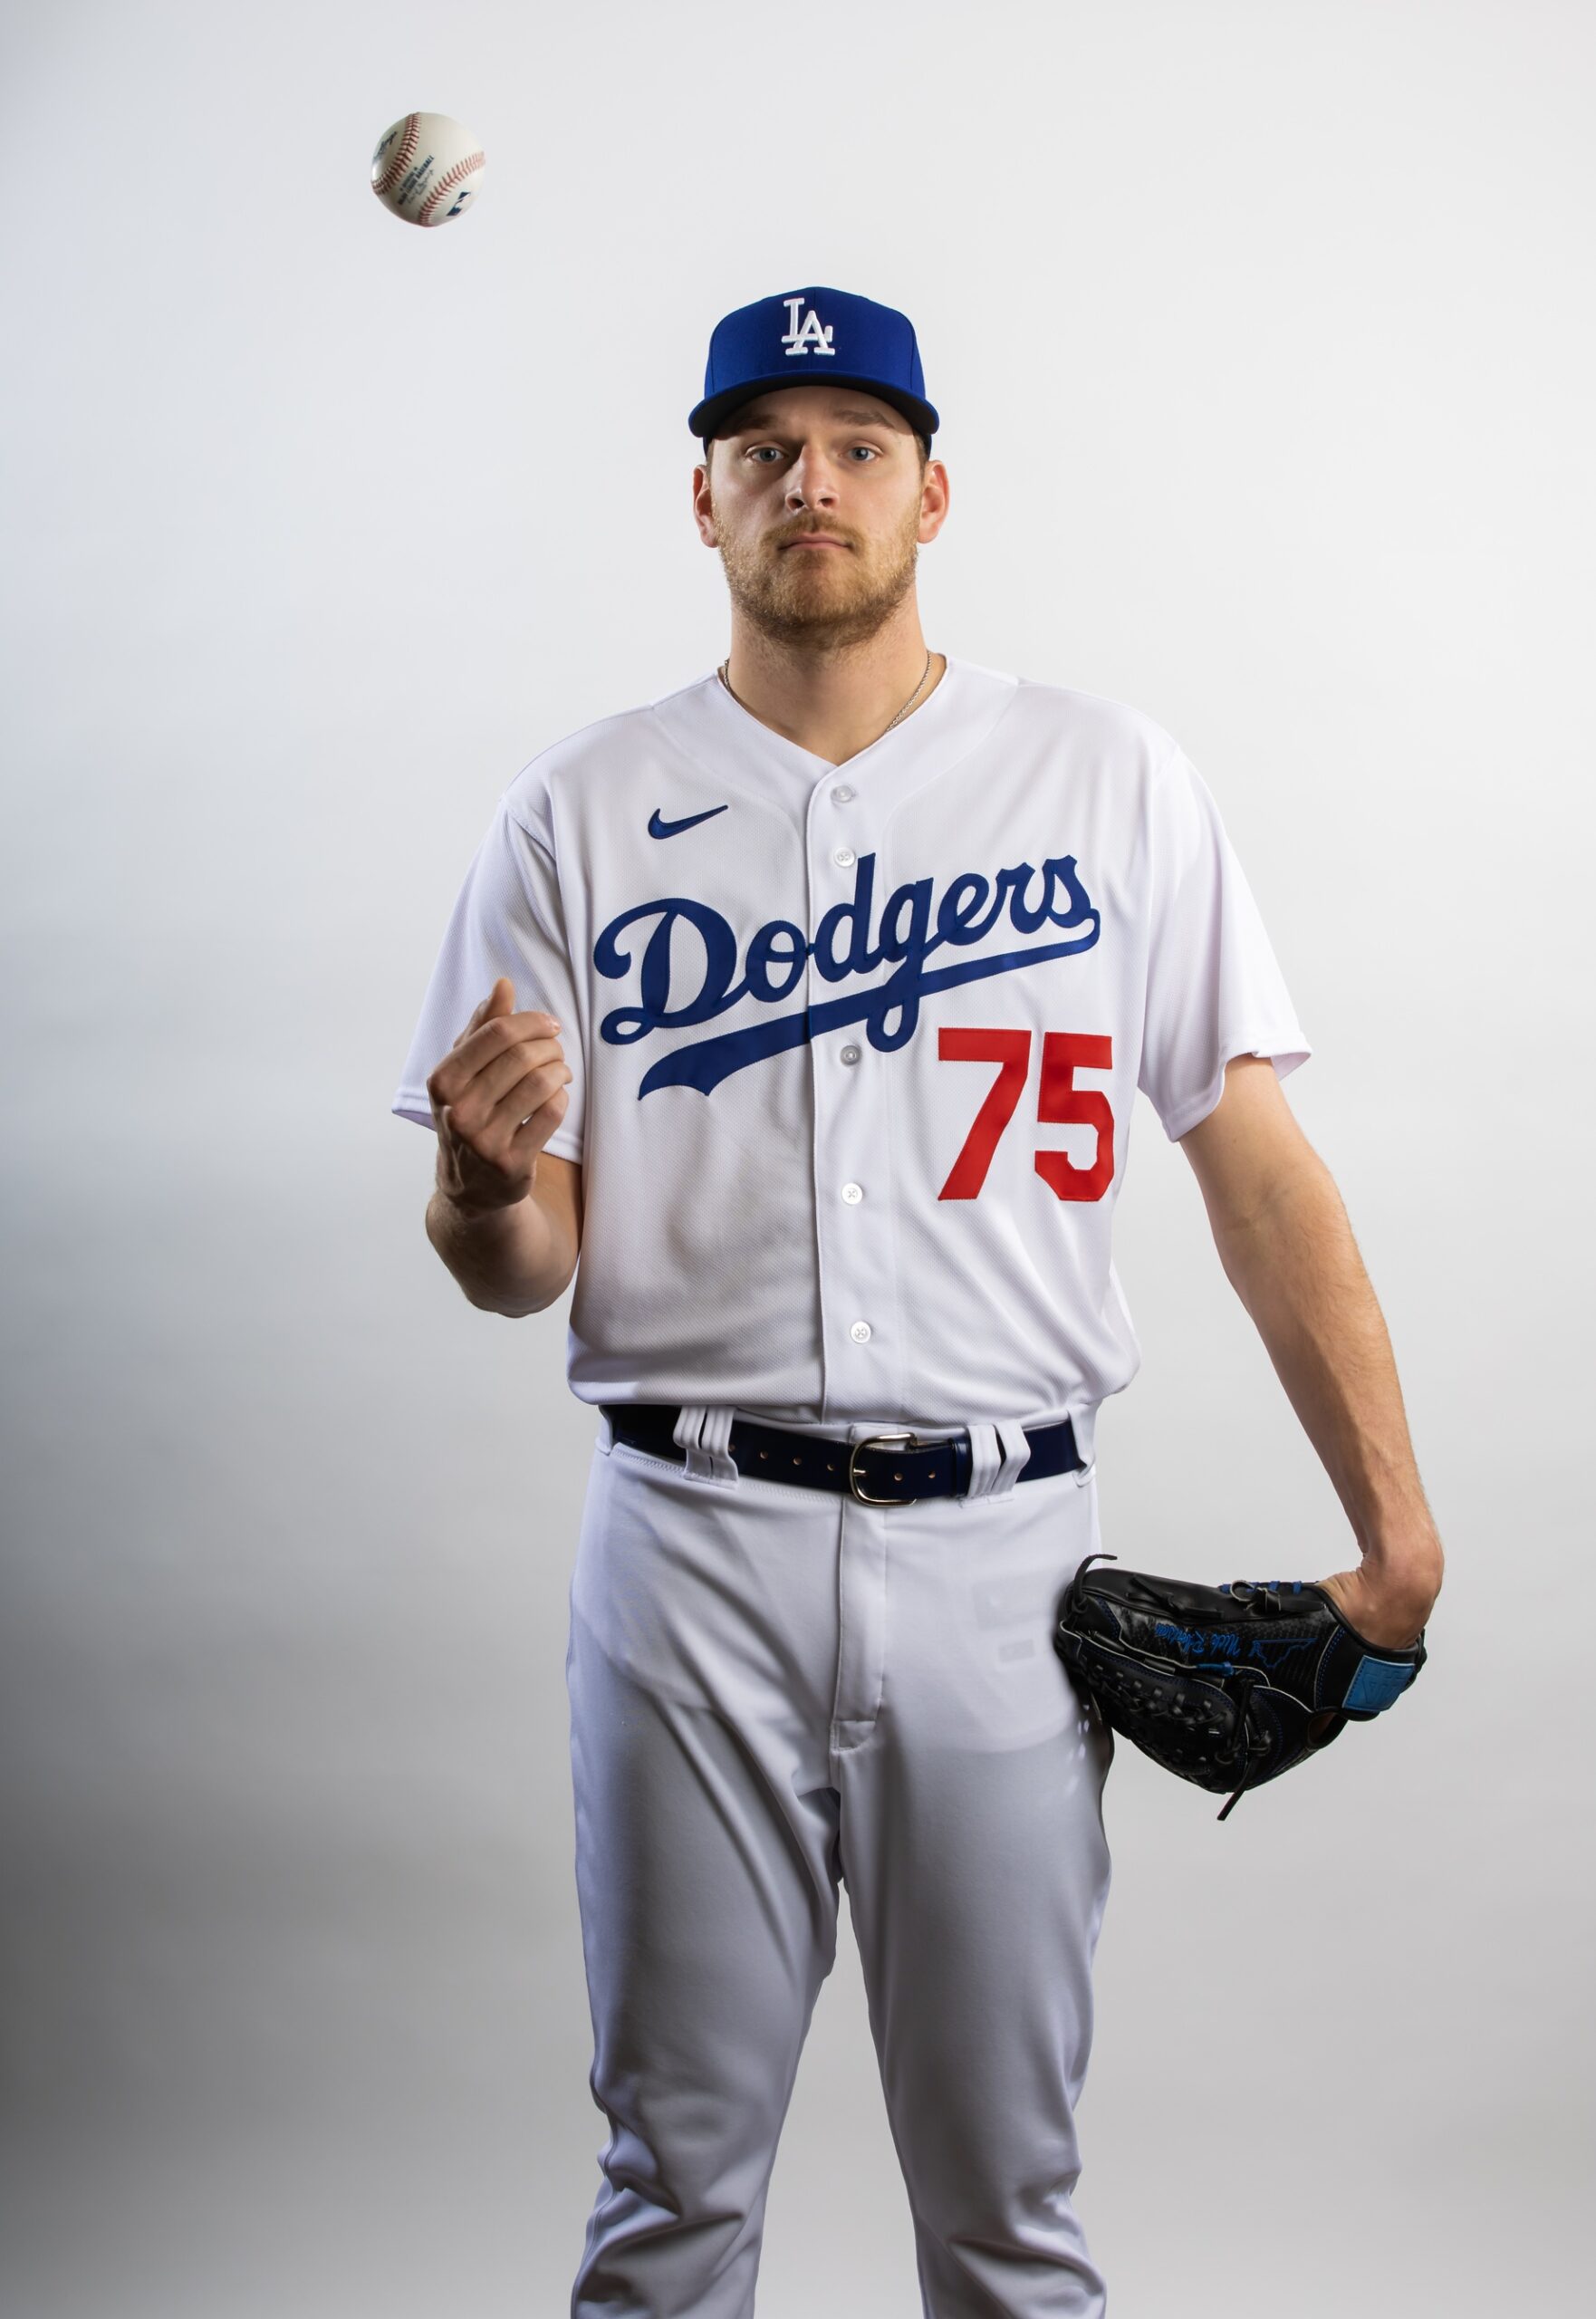 Dodgers Roster News: LA Calls Up Pitching Prospect to Bolster Bullpen for Series vs Reds